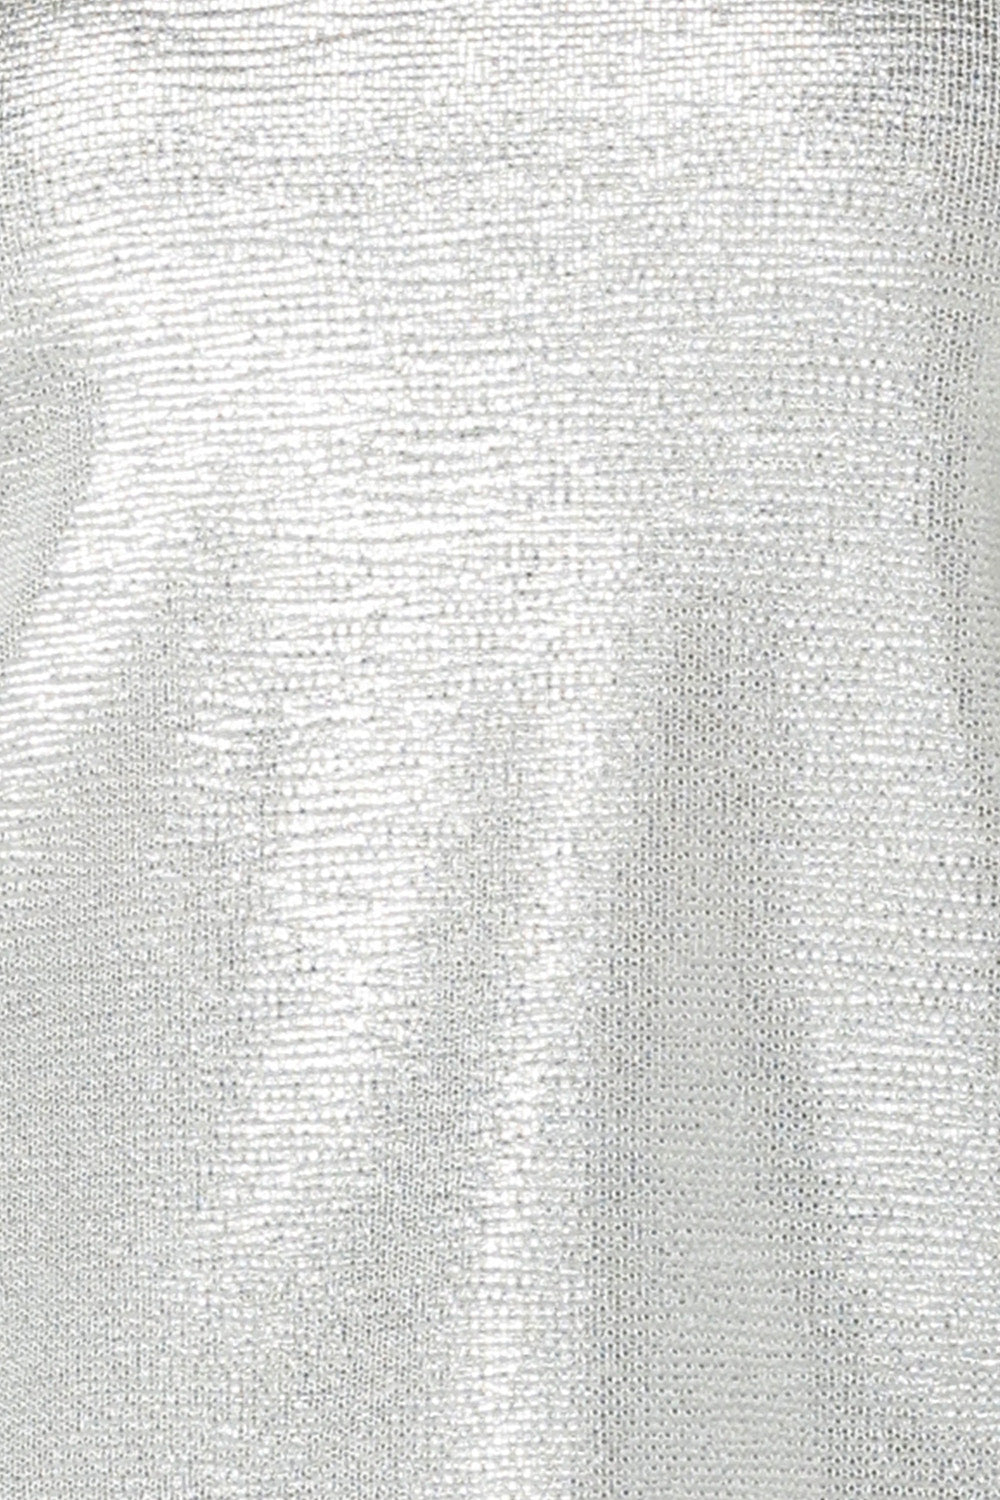 swatch of Australian and New Zealand fashion label L&F's silver sterling Xanadu fabric. Part of of our exclusive Up Late party collection, Silver sterling shimmer jersey is used for stylish Australian made tops, skirts and accessories in sizes 8-24. 